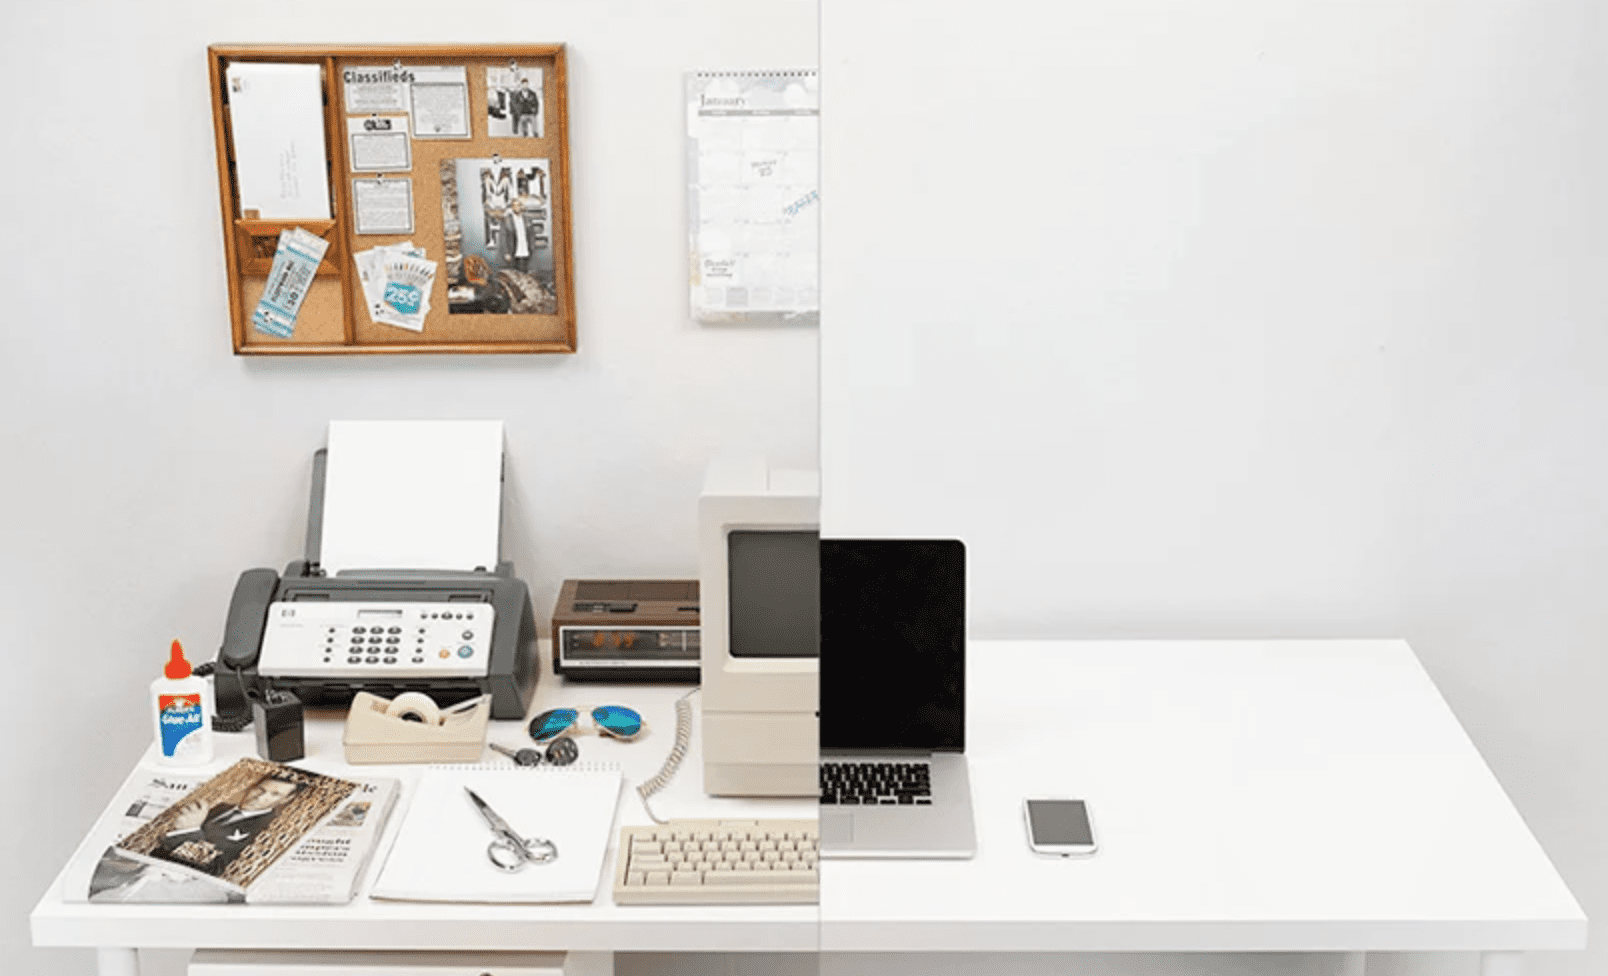 A split image - half shows a cluttered office desk of the past, the other a modern office desk with only a laptop and phone